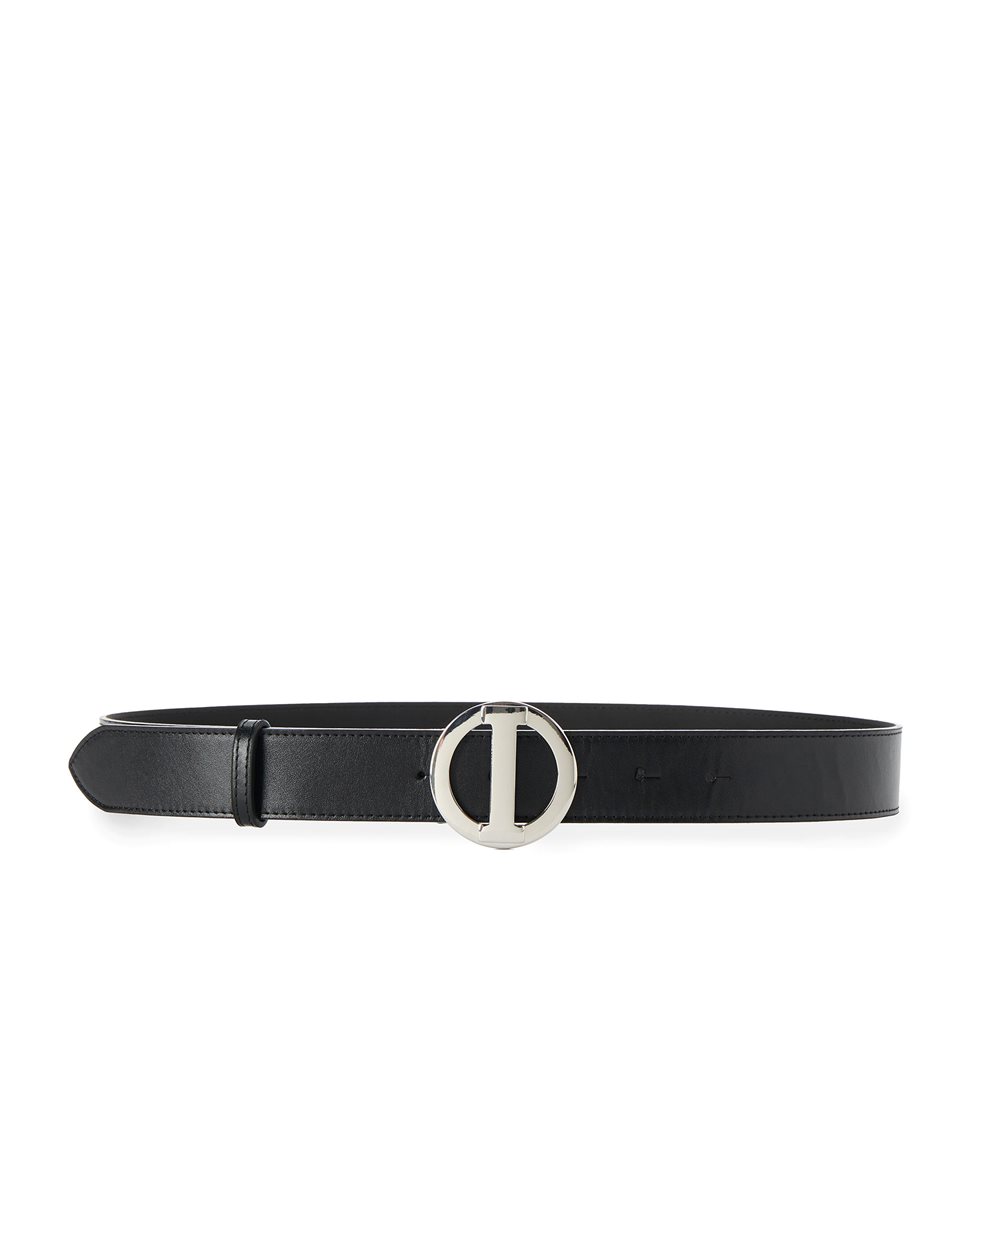 Leather belt with logo - carosello HP man accessories | Iceberg - Official Website